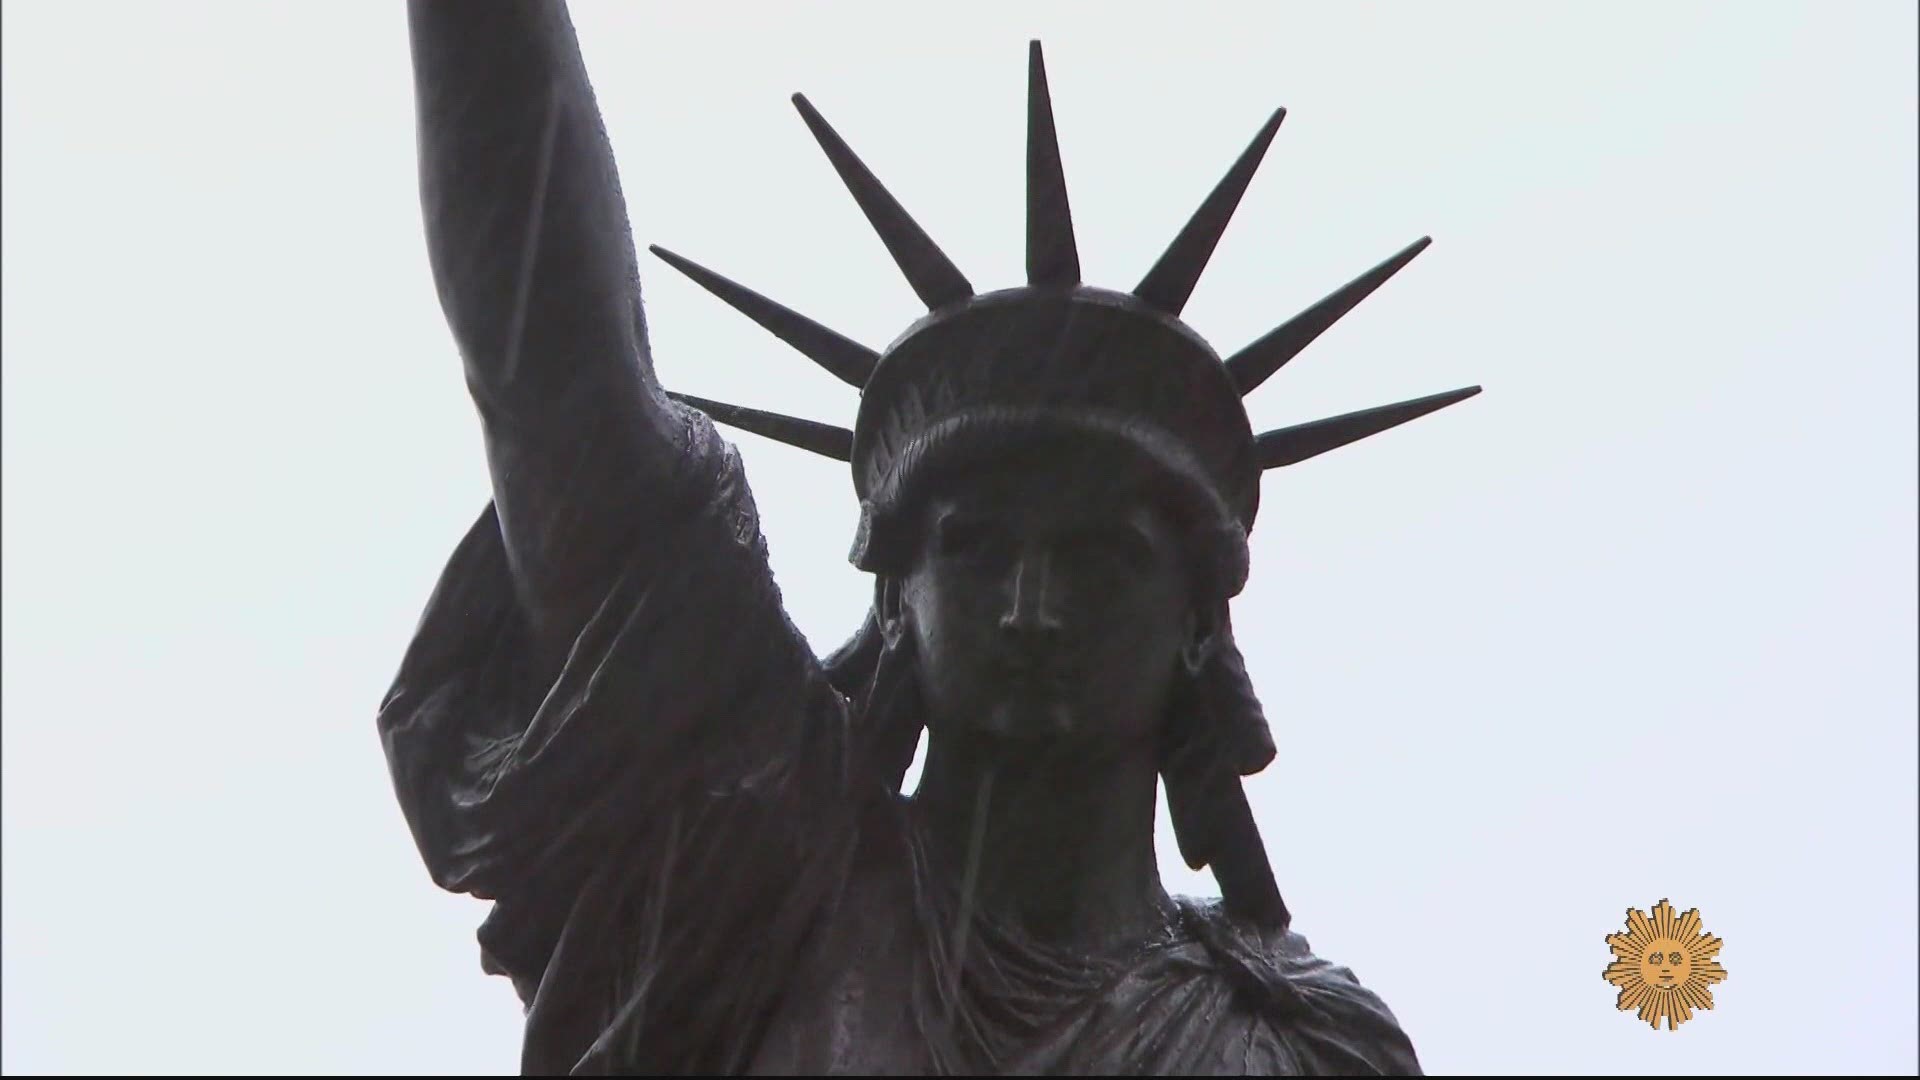 The smaller Statue of Liberty will be on display in DC for the next 10 years.